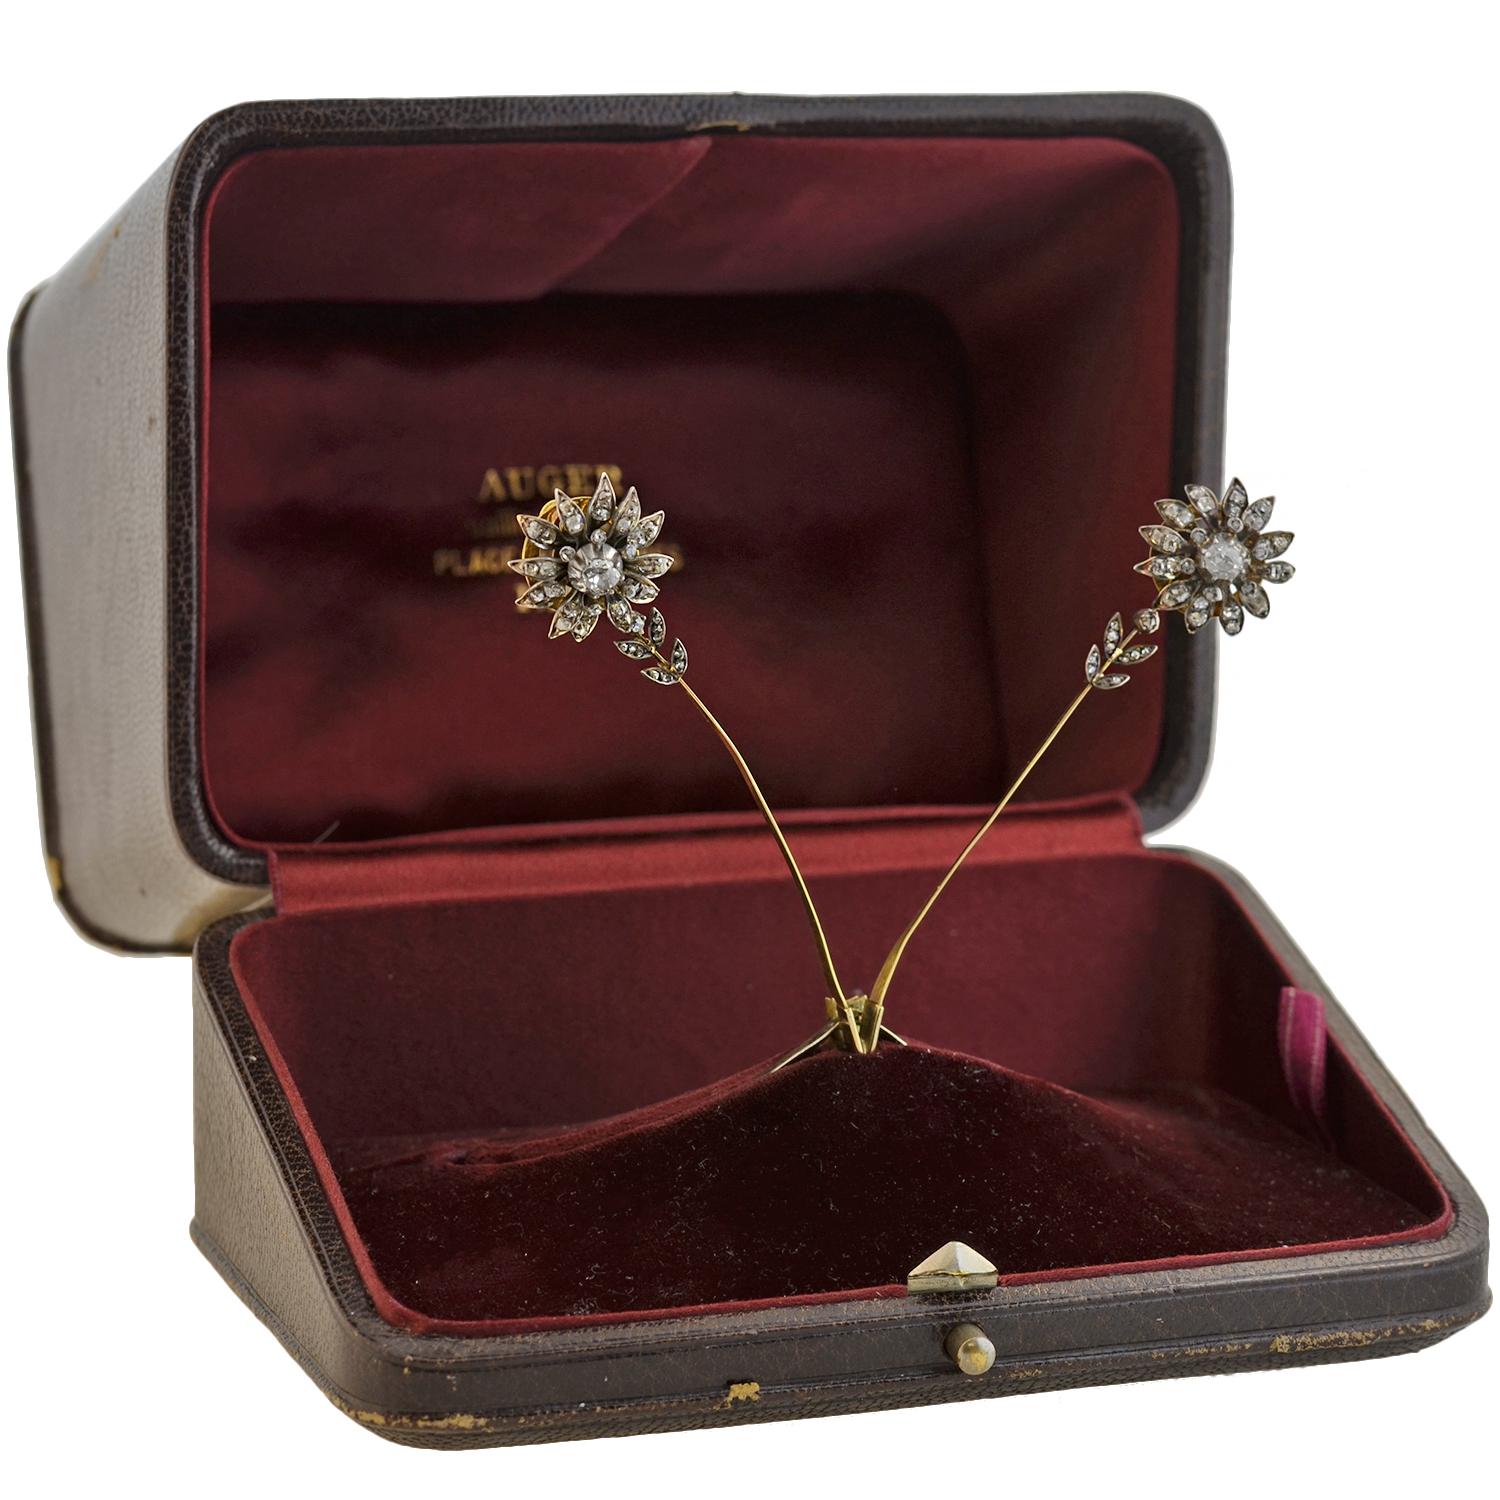 An exquisite and unusual regal tiara from the early Victorian (ca1850s) era! This beautiful and rare piece is crafted in sterling silver and 18kt yellow gold and adorns two tremblé style diamond flower aigrette's which sprout up on either side of a